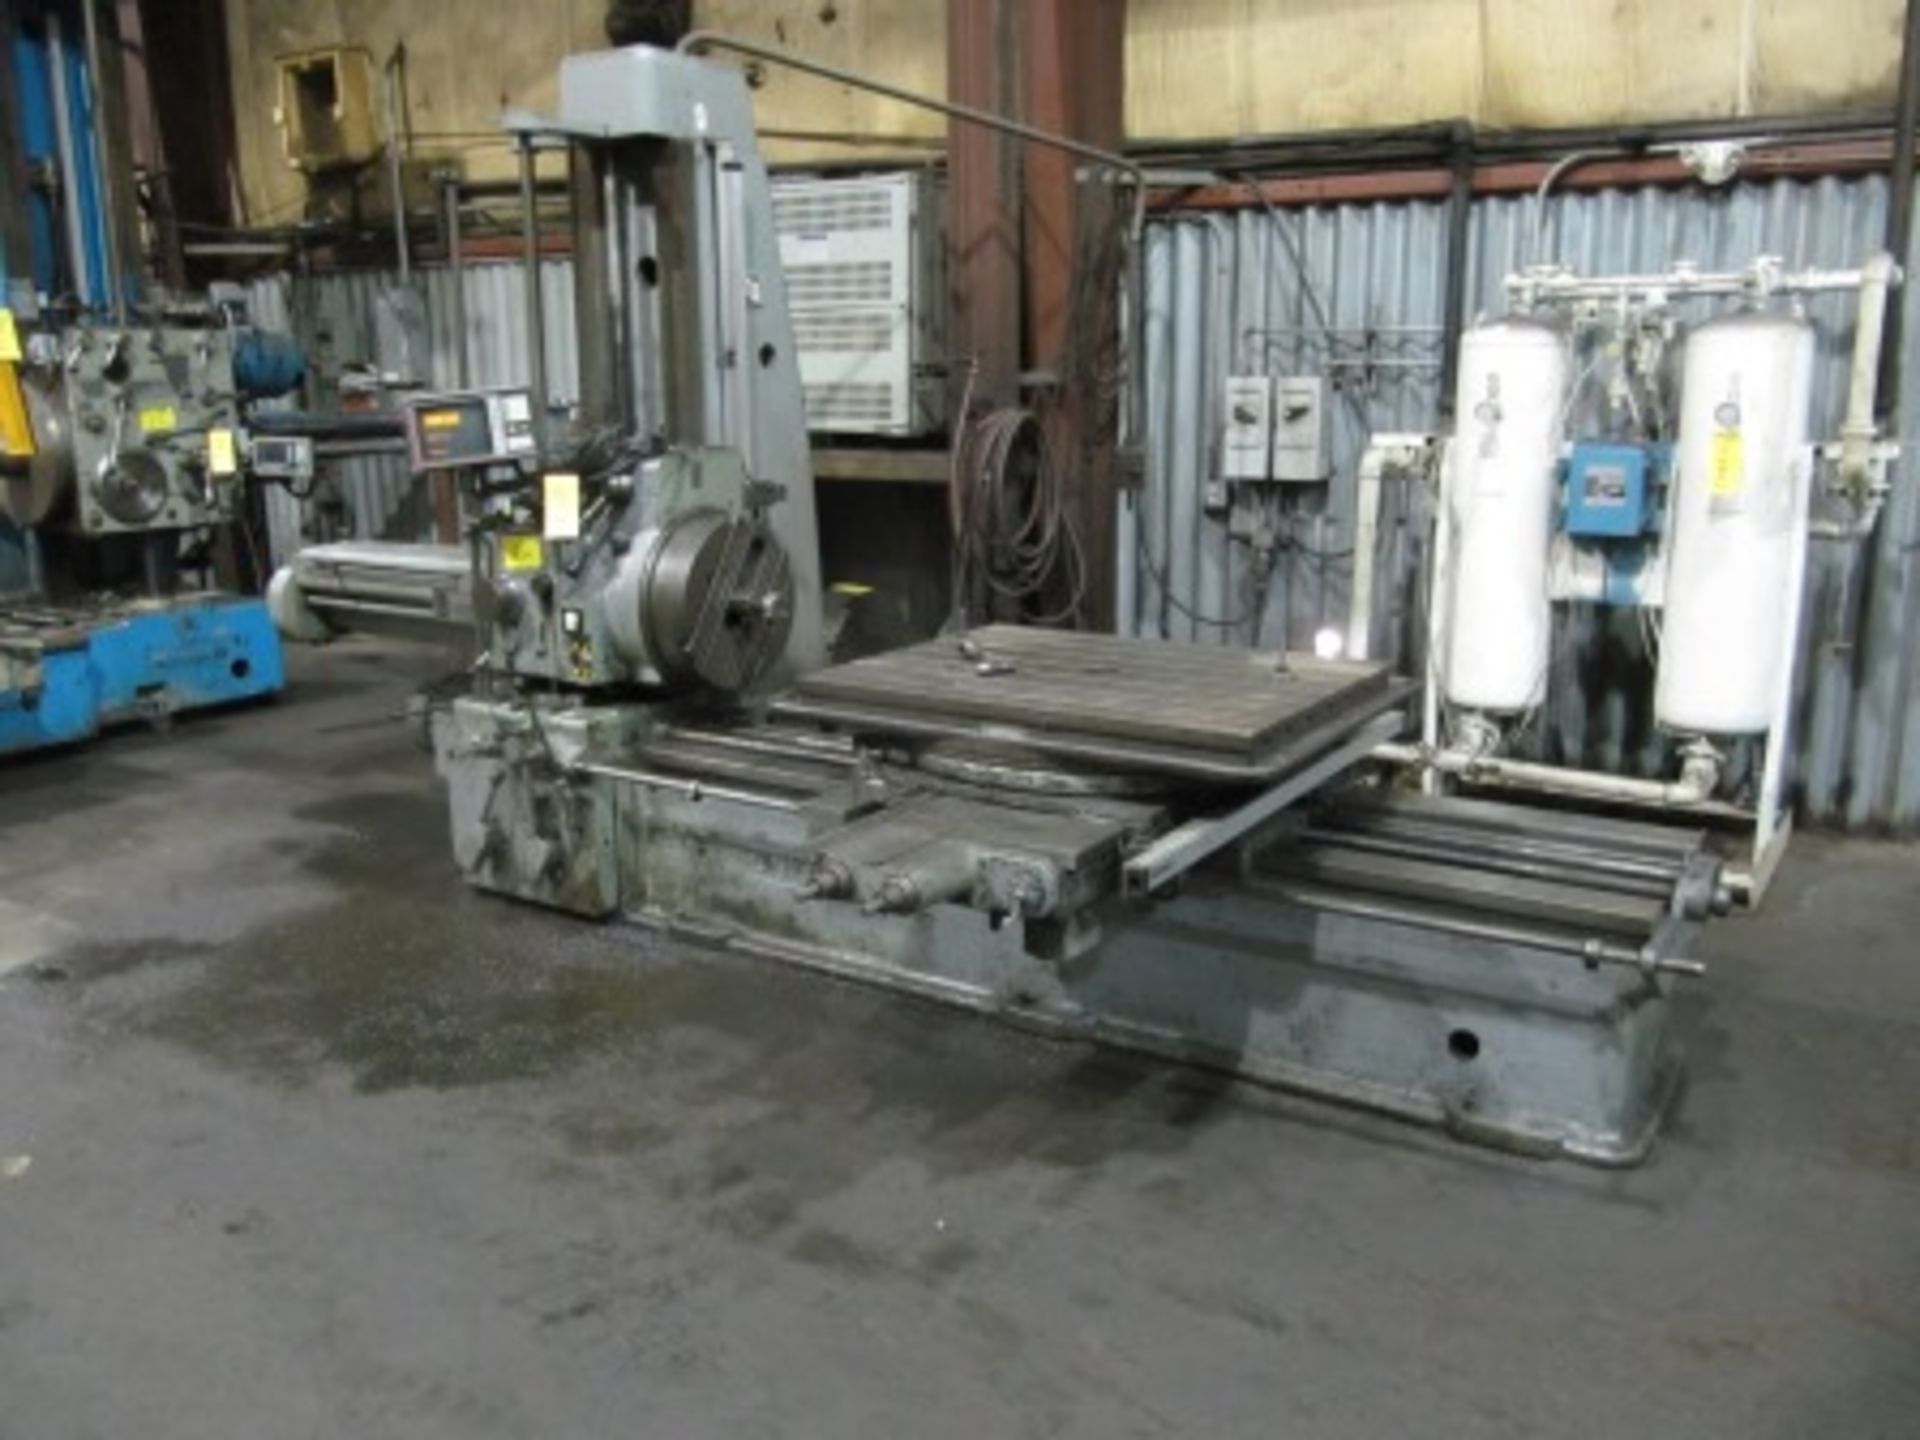 UNION WMW BFT80 3" TABLE TYPE HORIZONTAL BORING MILL, 3" SPINDLE, 44"X36" TABLE, TRAVELS: X-54", Y-